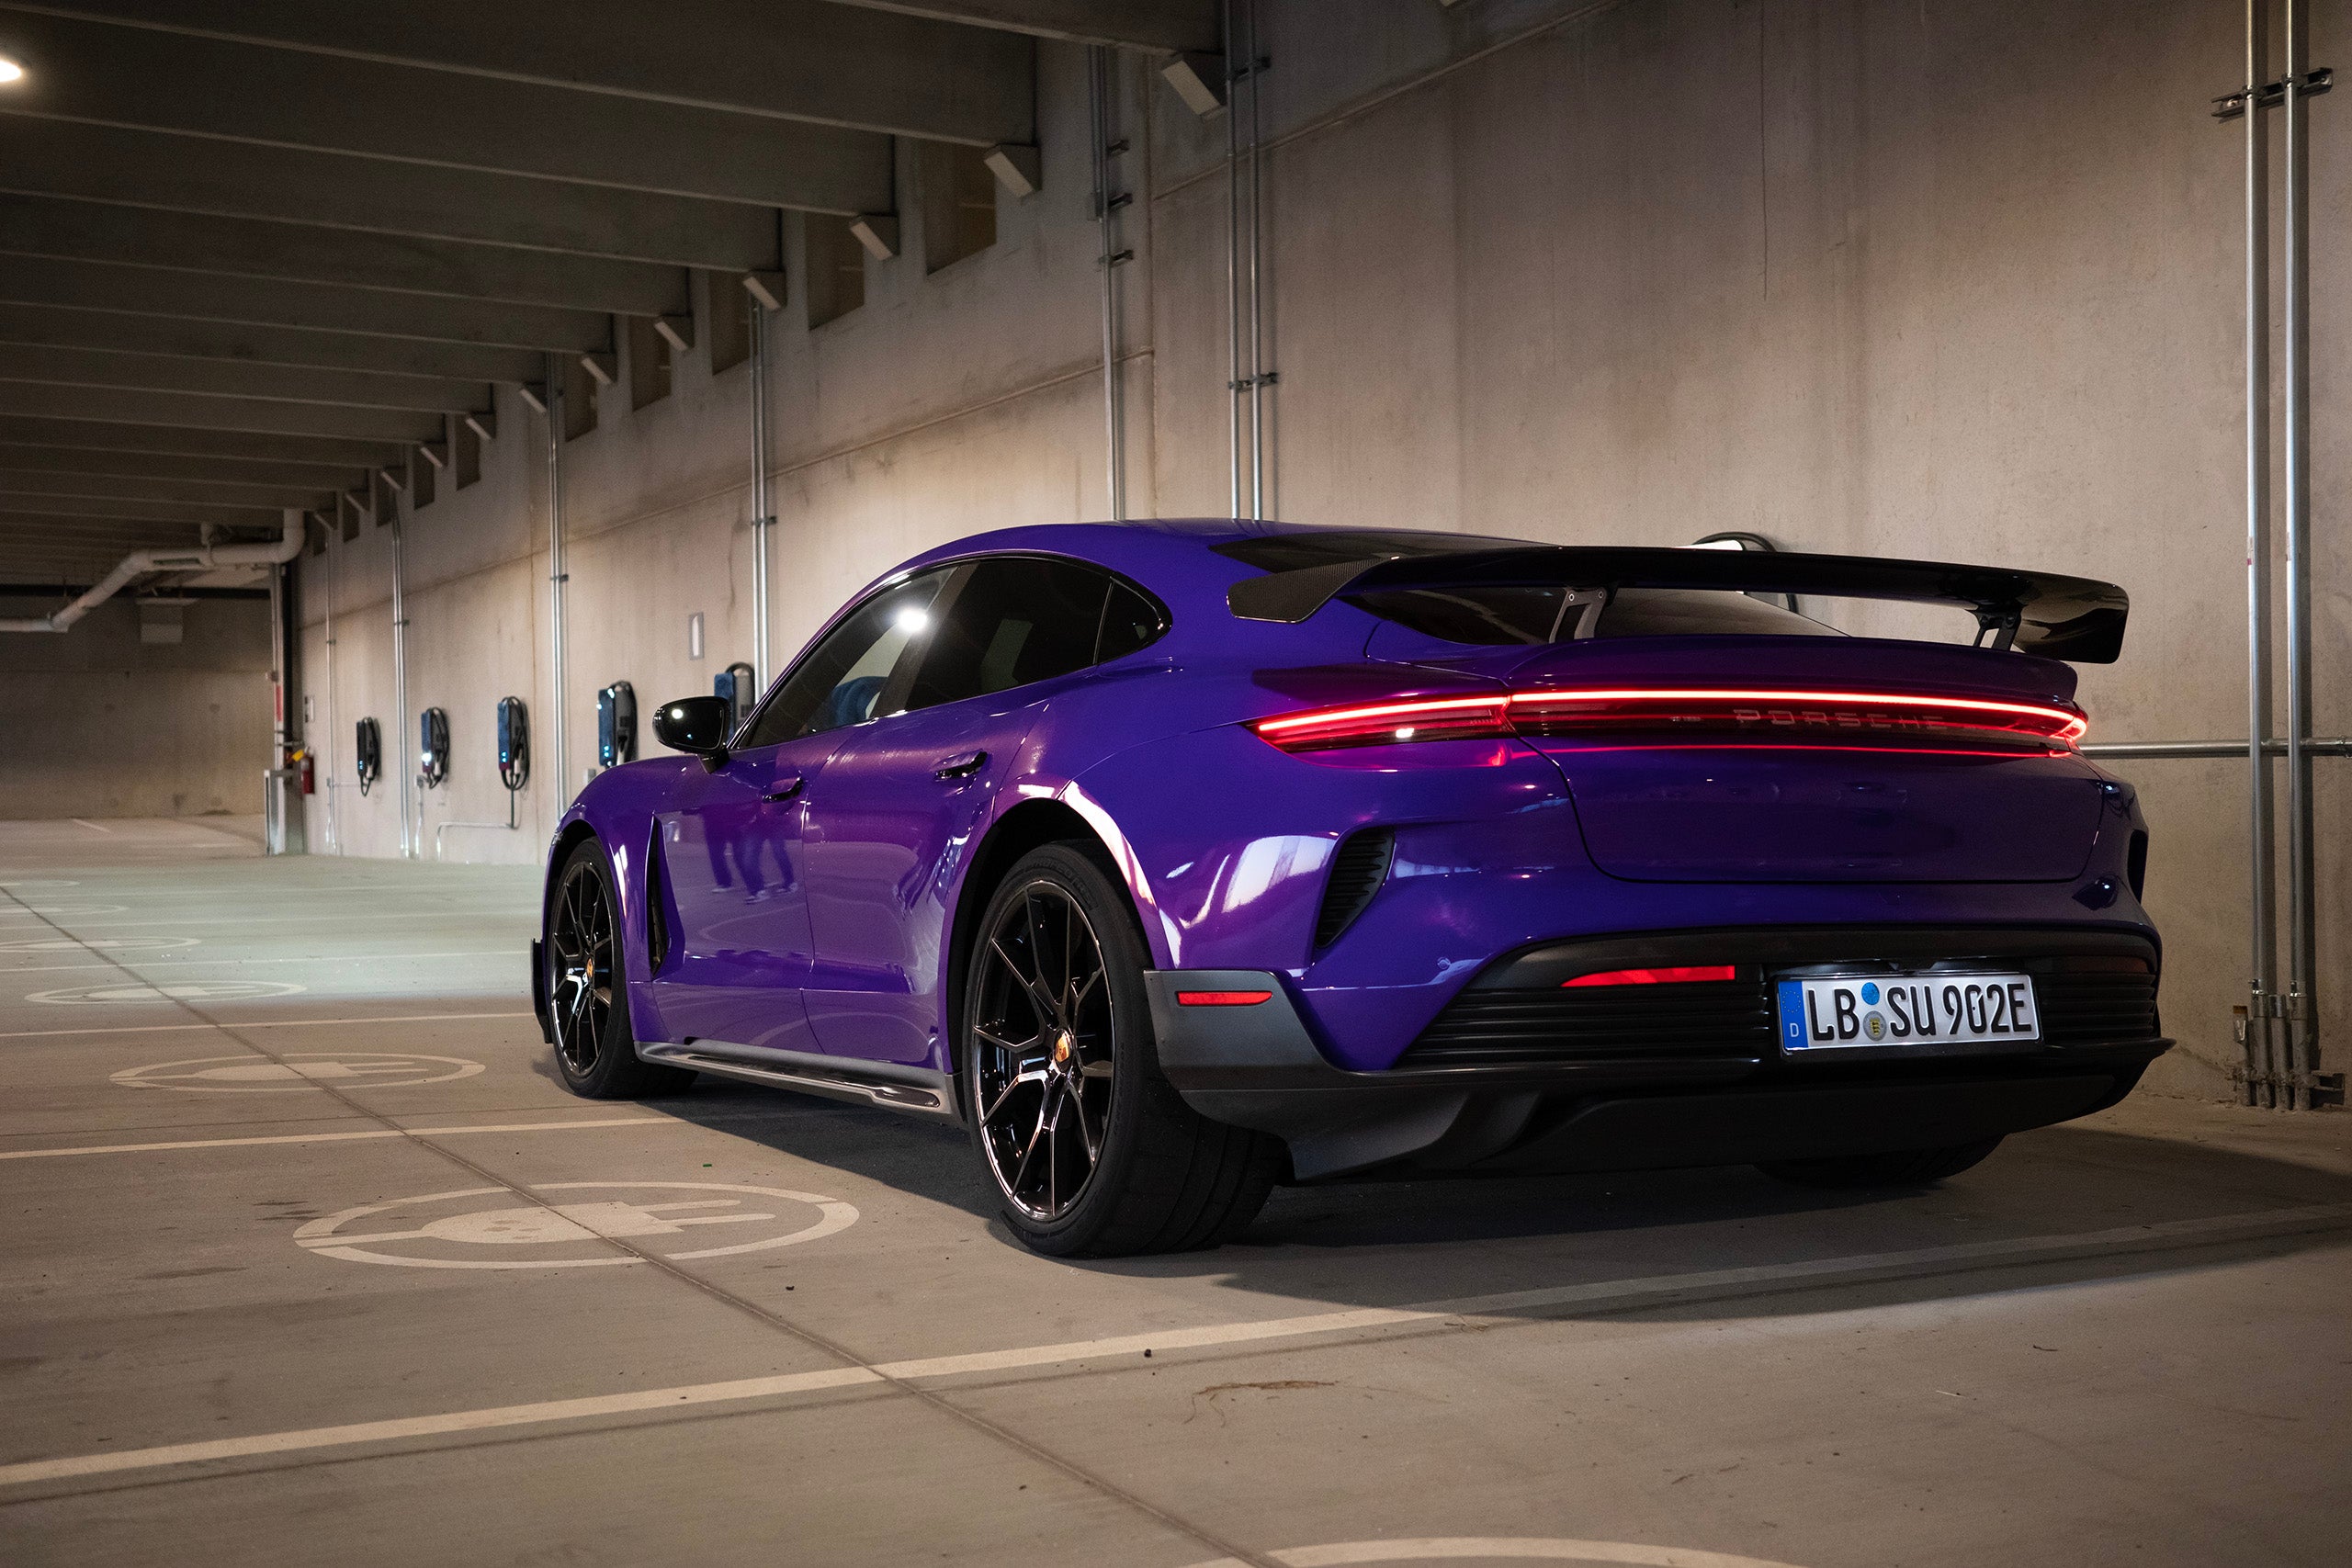 Sky Purple looks nice, doesn't it? Porsche tells us it'll be exclusive to the Turbo GT for a year, before reaching other models.